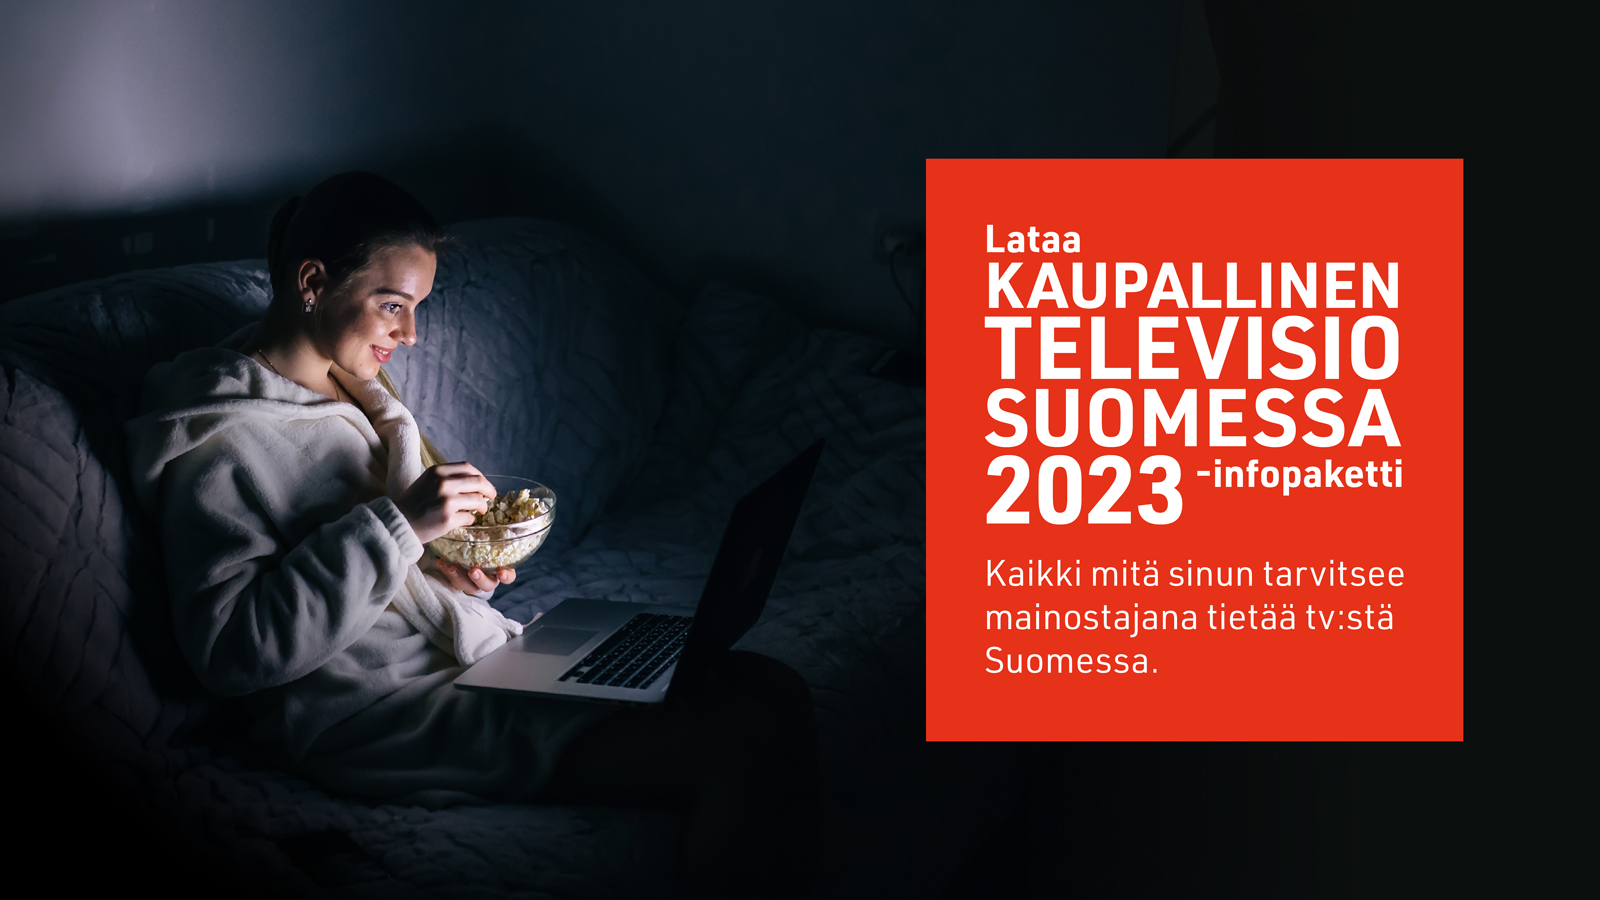 Download the report for the Commercial TV Landscape in Finland!